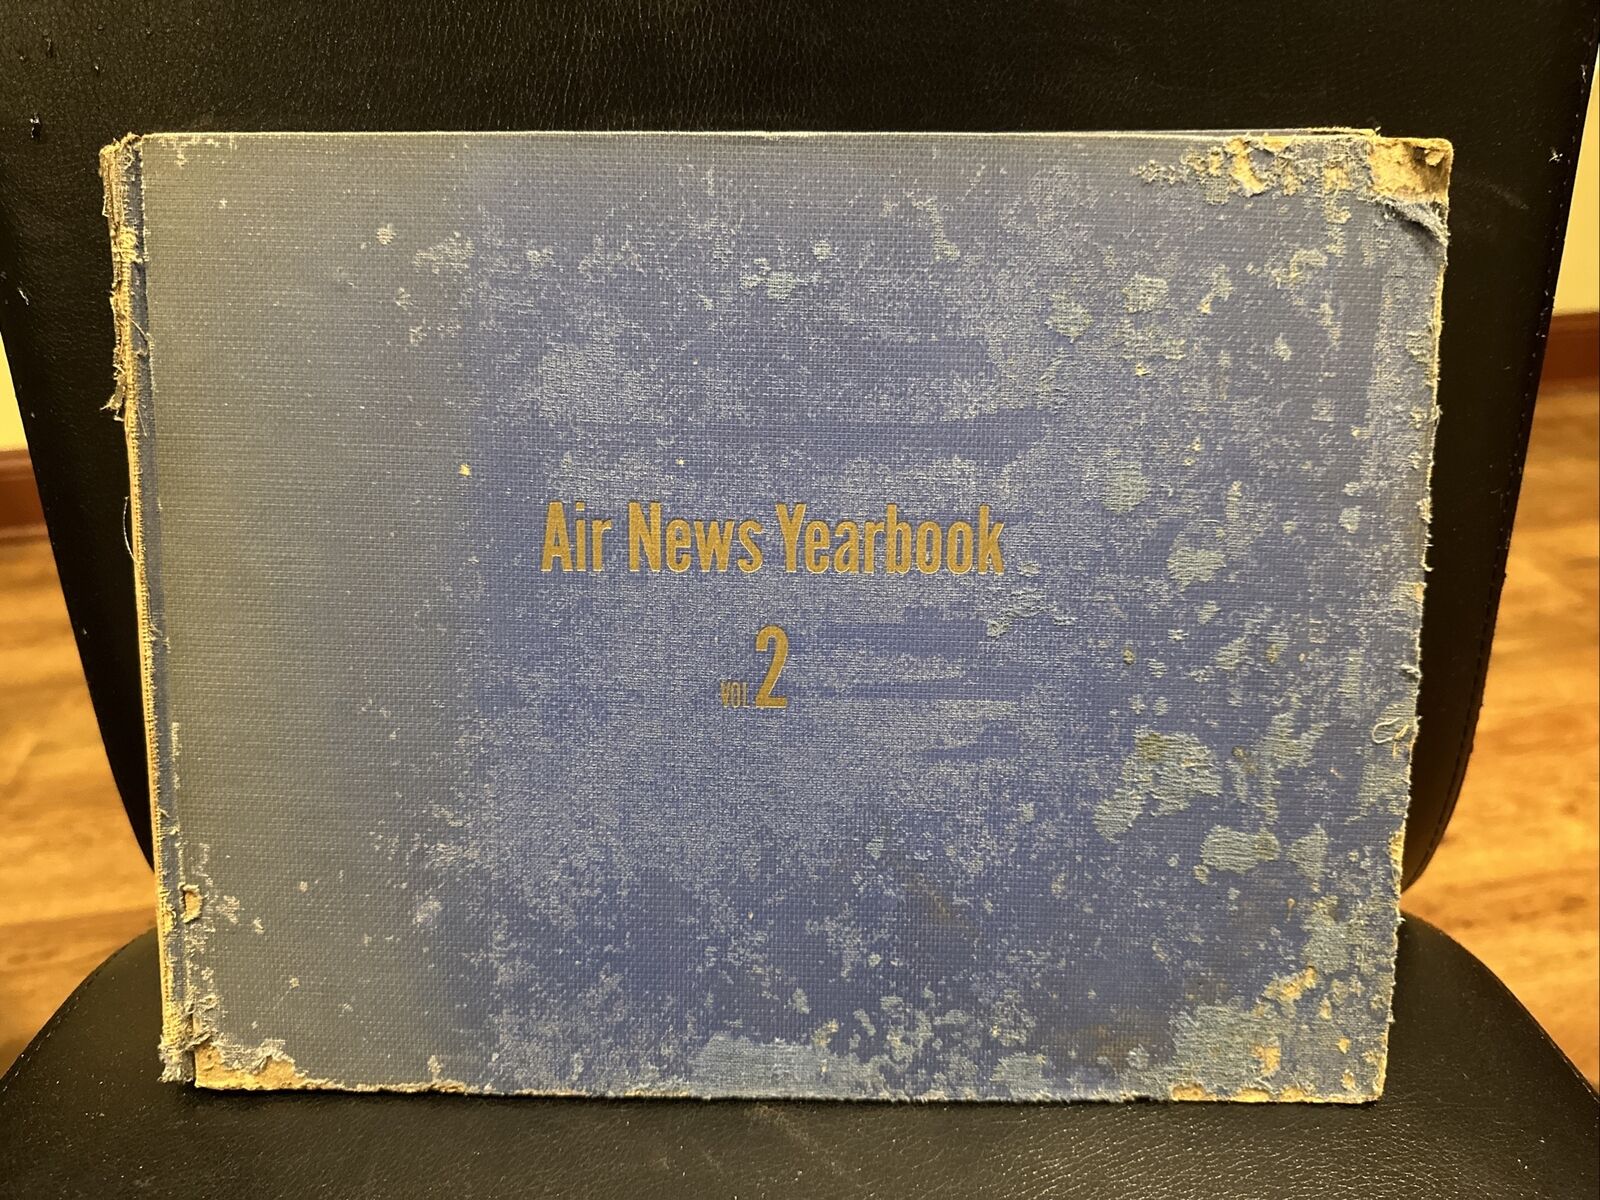 1944 Air News Yearbook Vol. 2, Edited by Phillip Andrews, 1st Ed